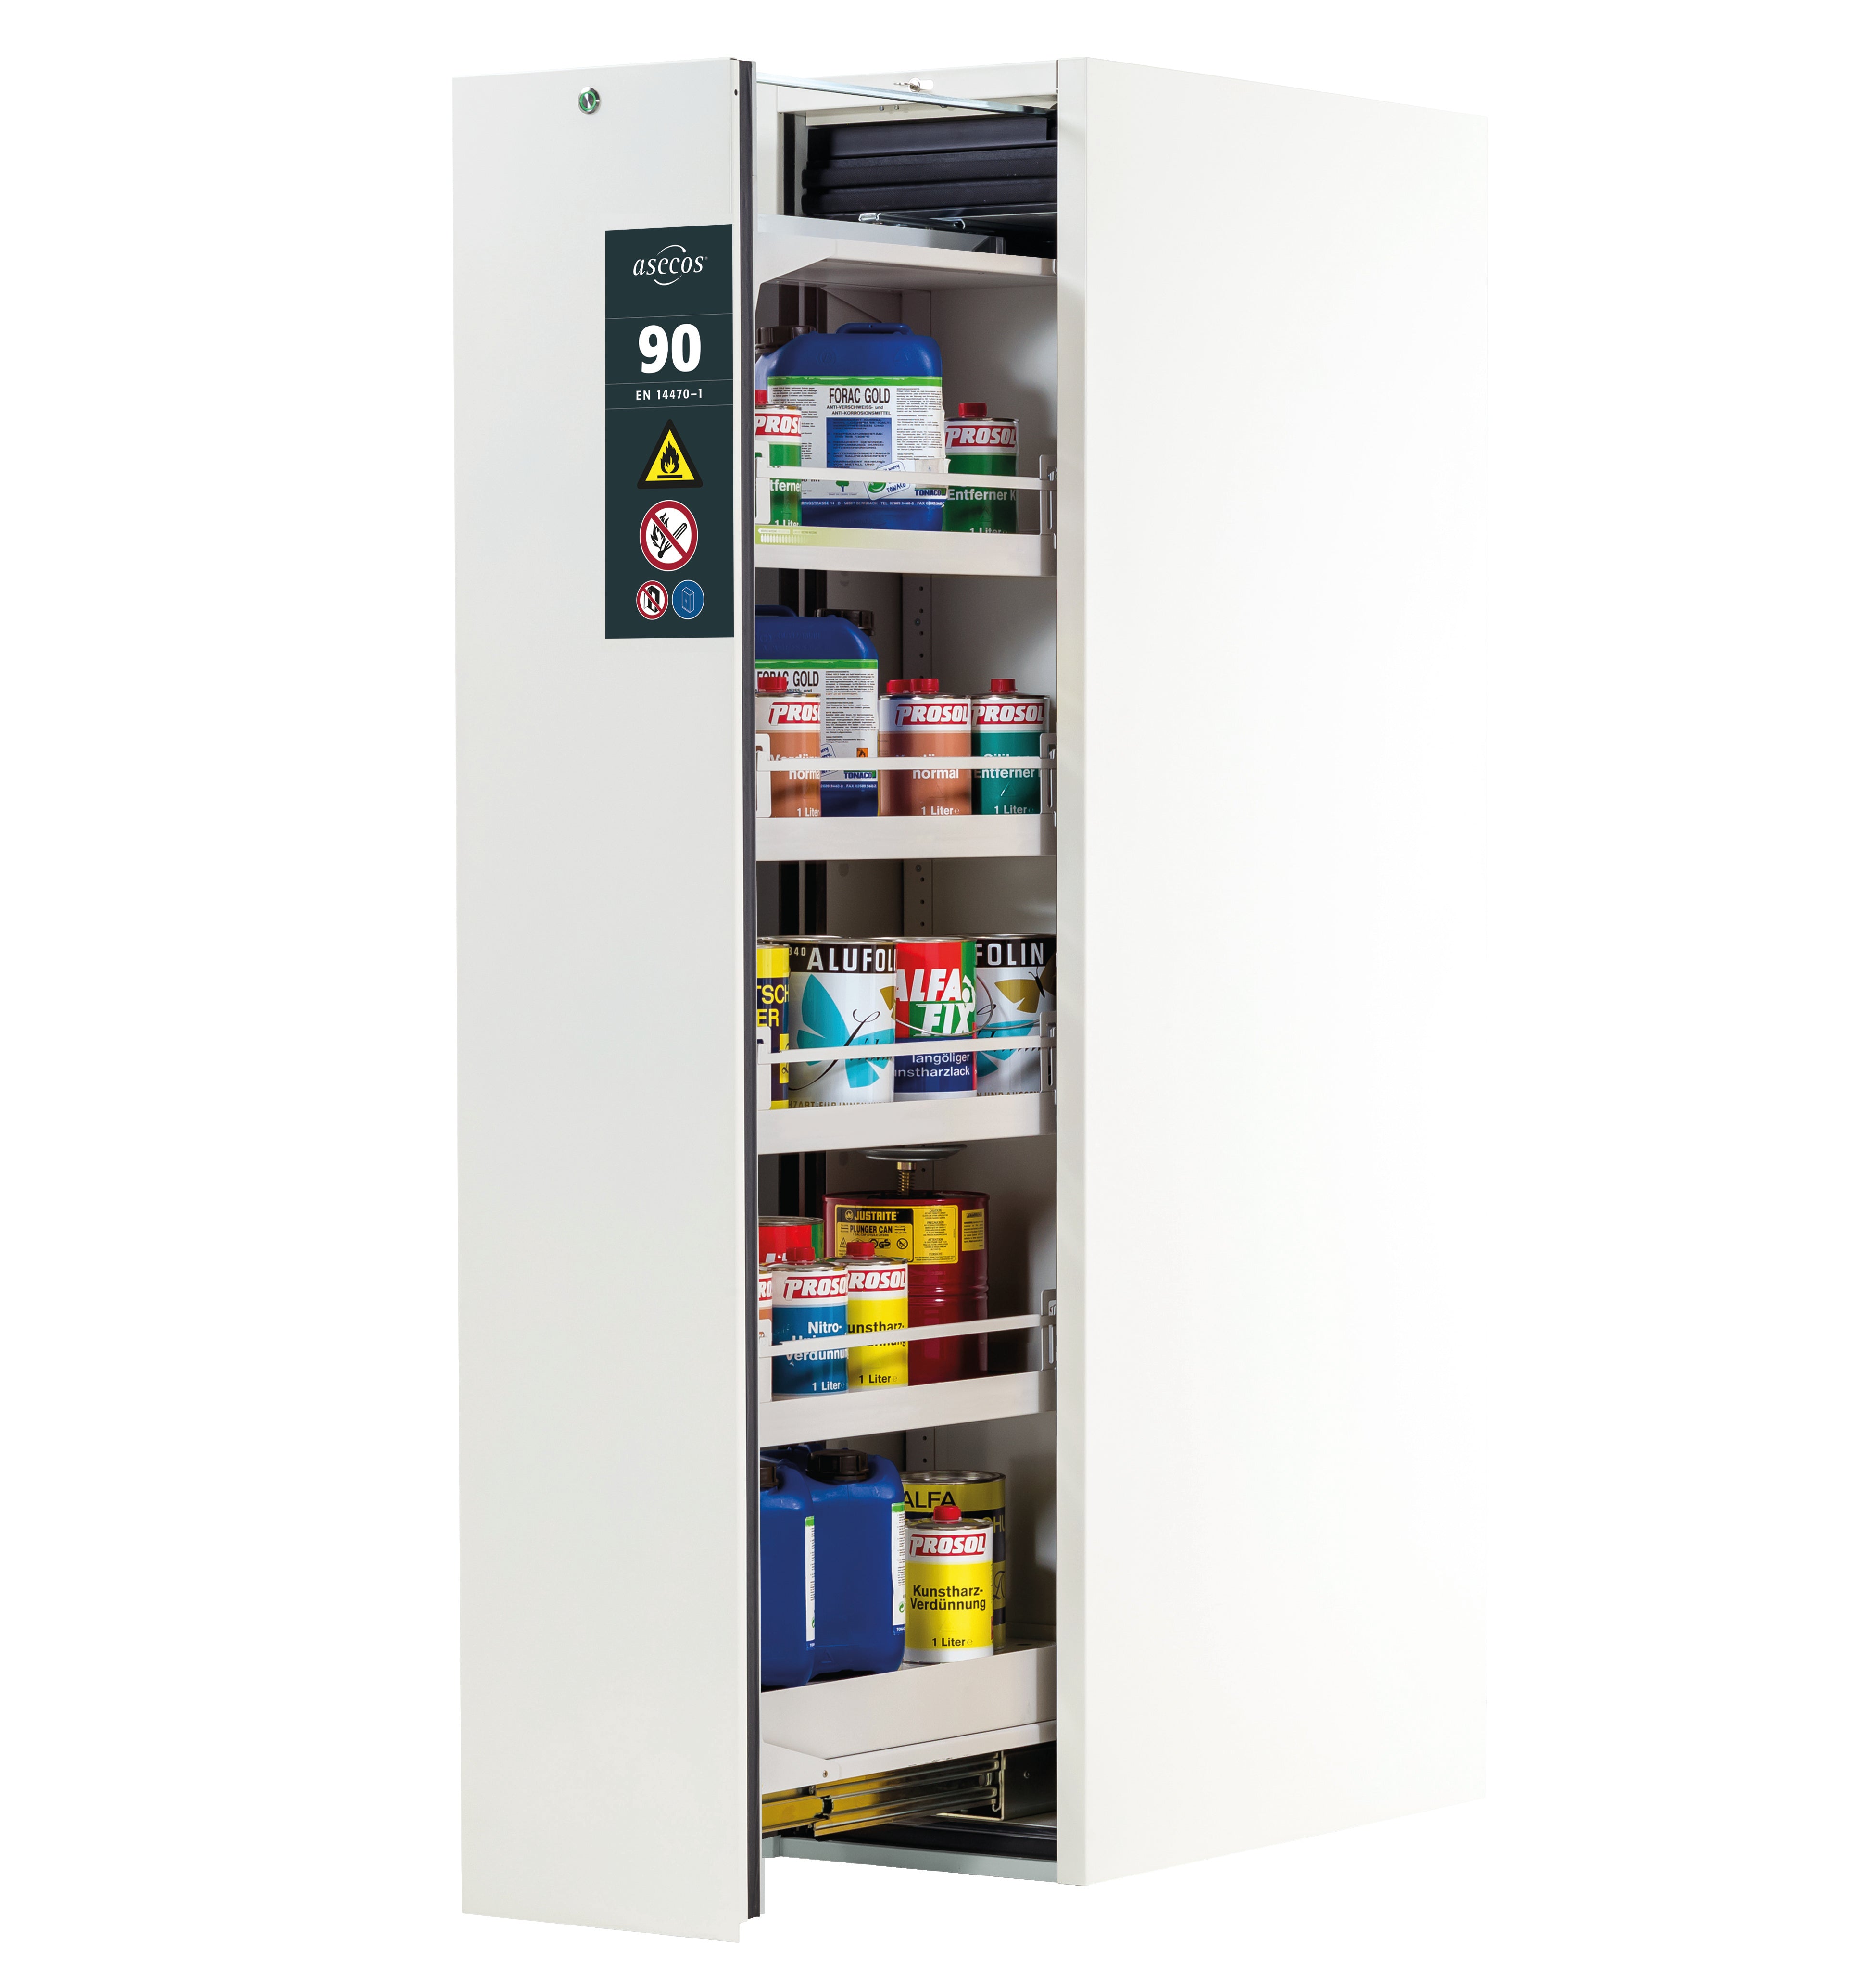 Type 90 safety cabinet V-MOVE-90 model V90.196.045.VDAC:0012 in laboratory white (similar to RAL 9016) with 4x standard tray base (sheet steel)